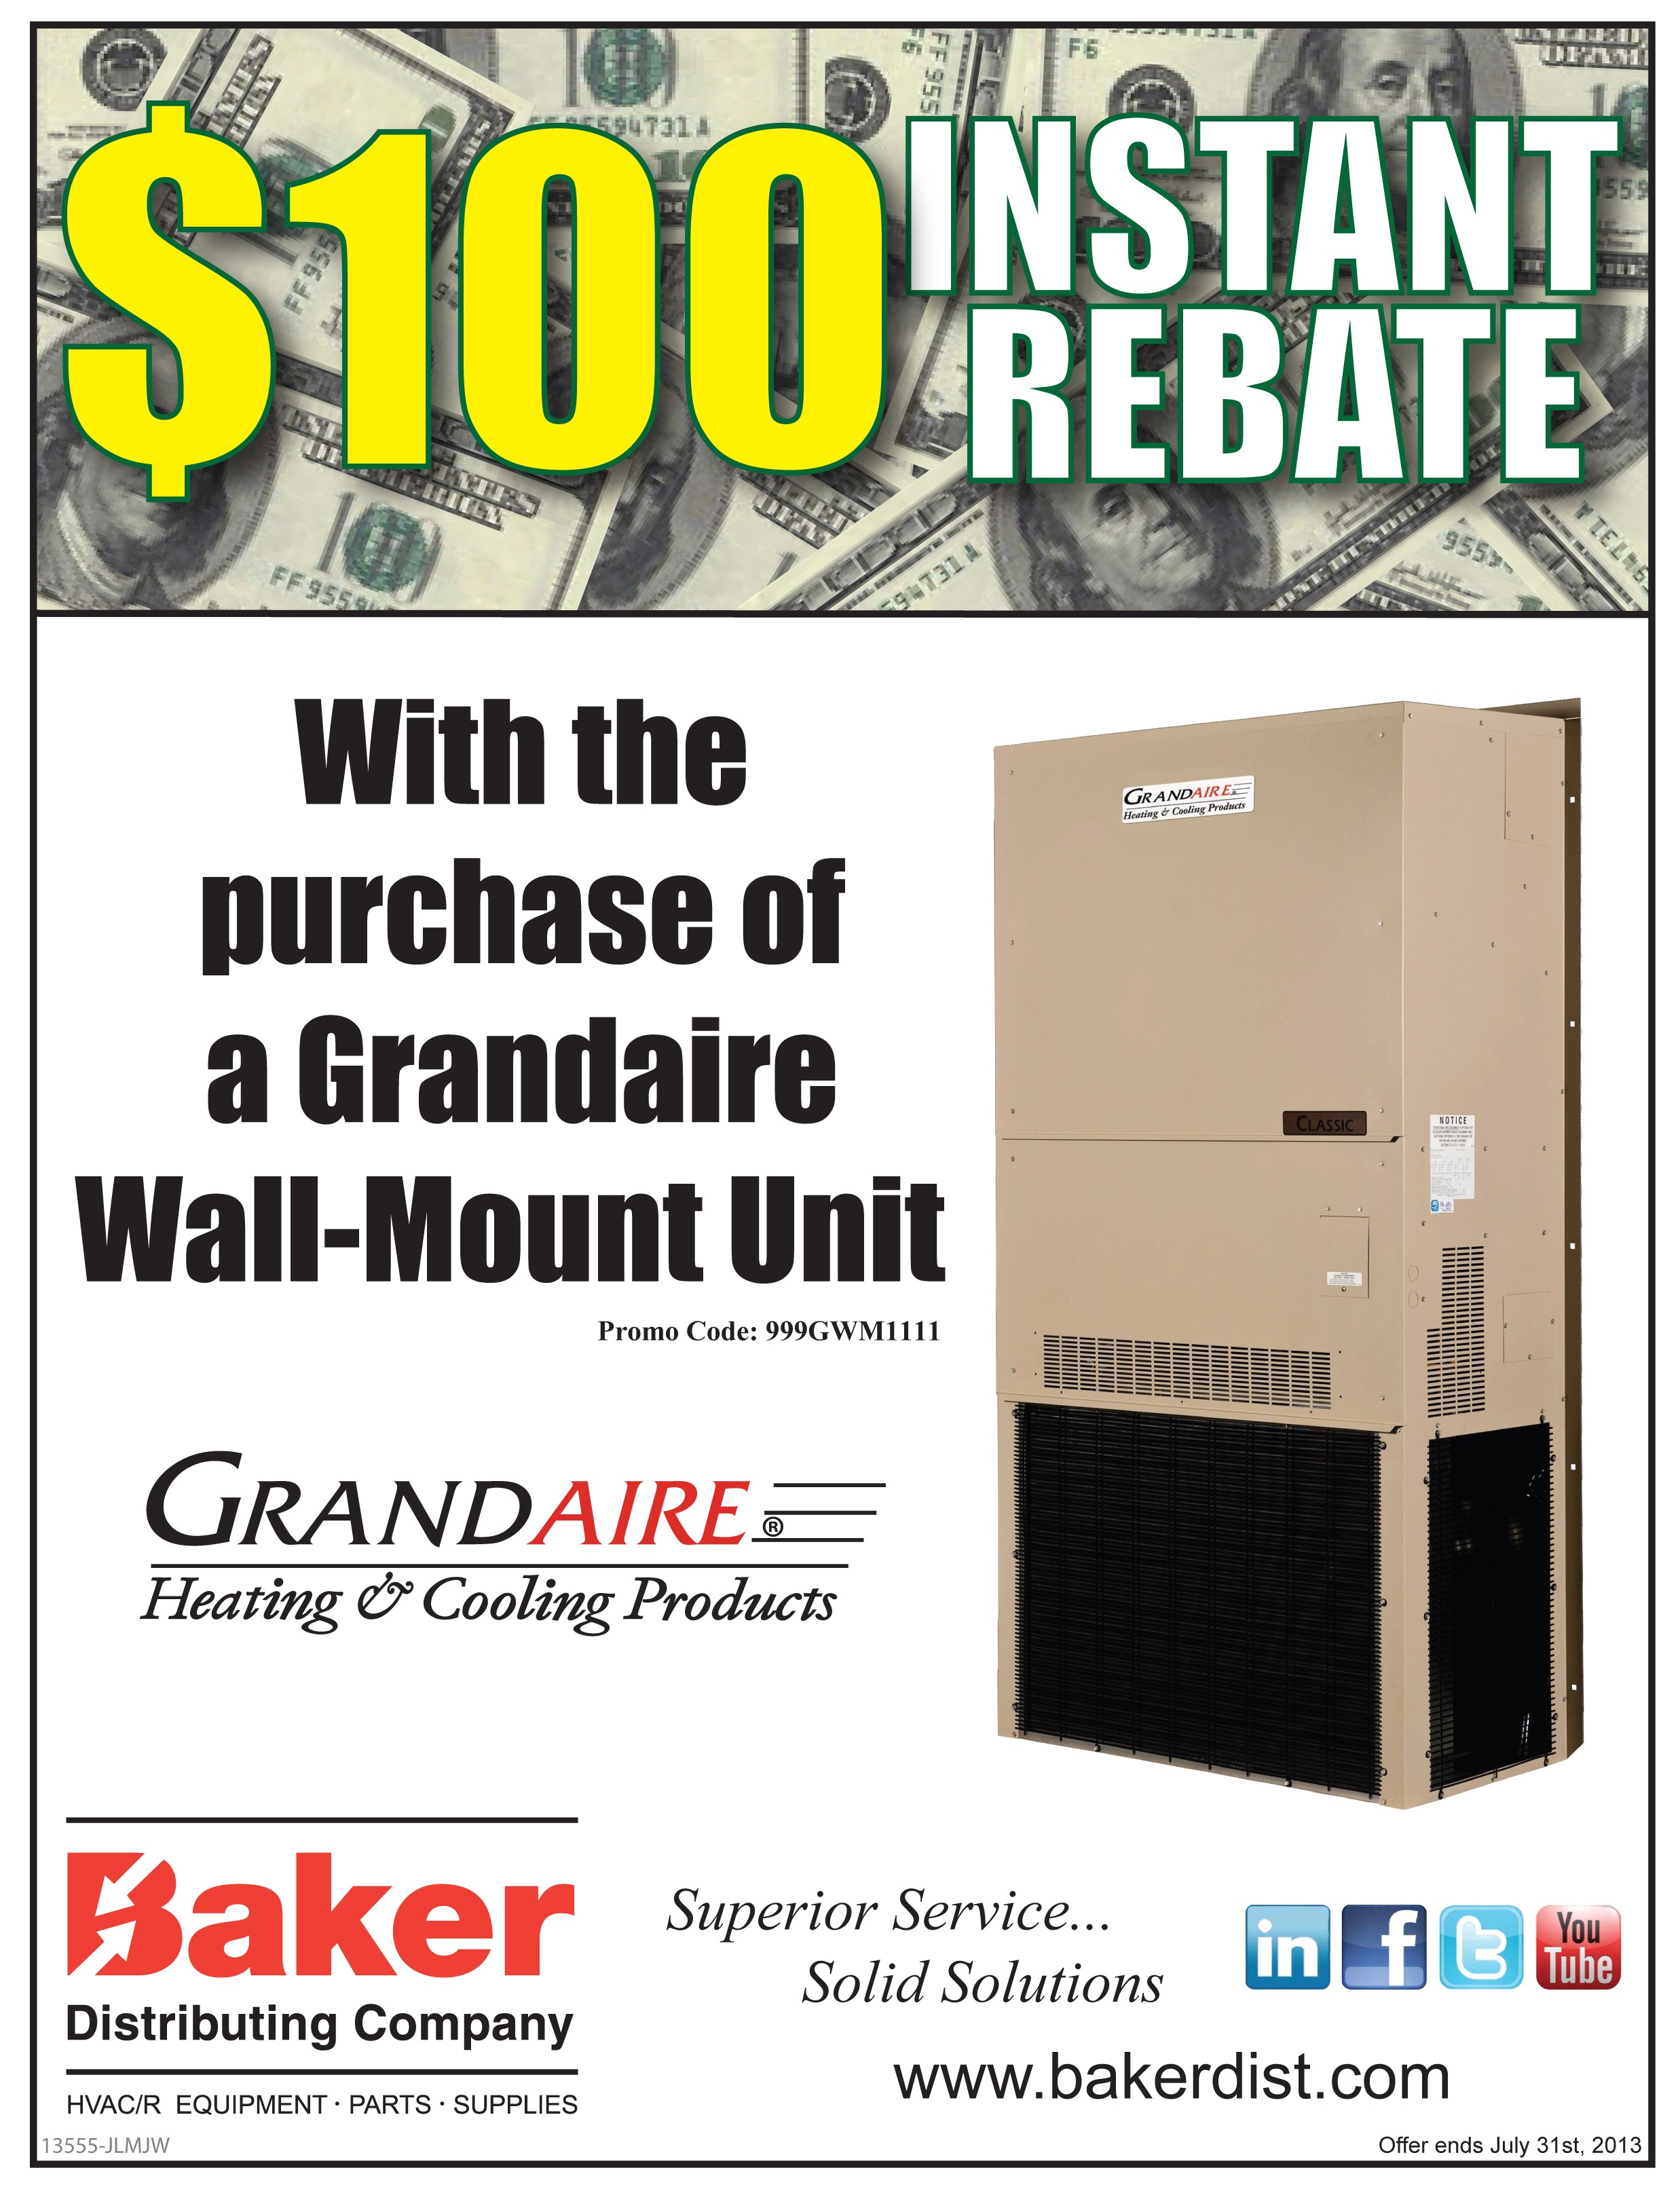  100 Instant Rebate From Baker Distributing Company The Successful 